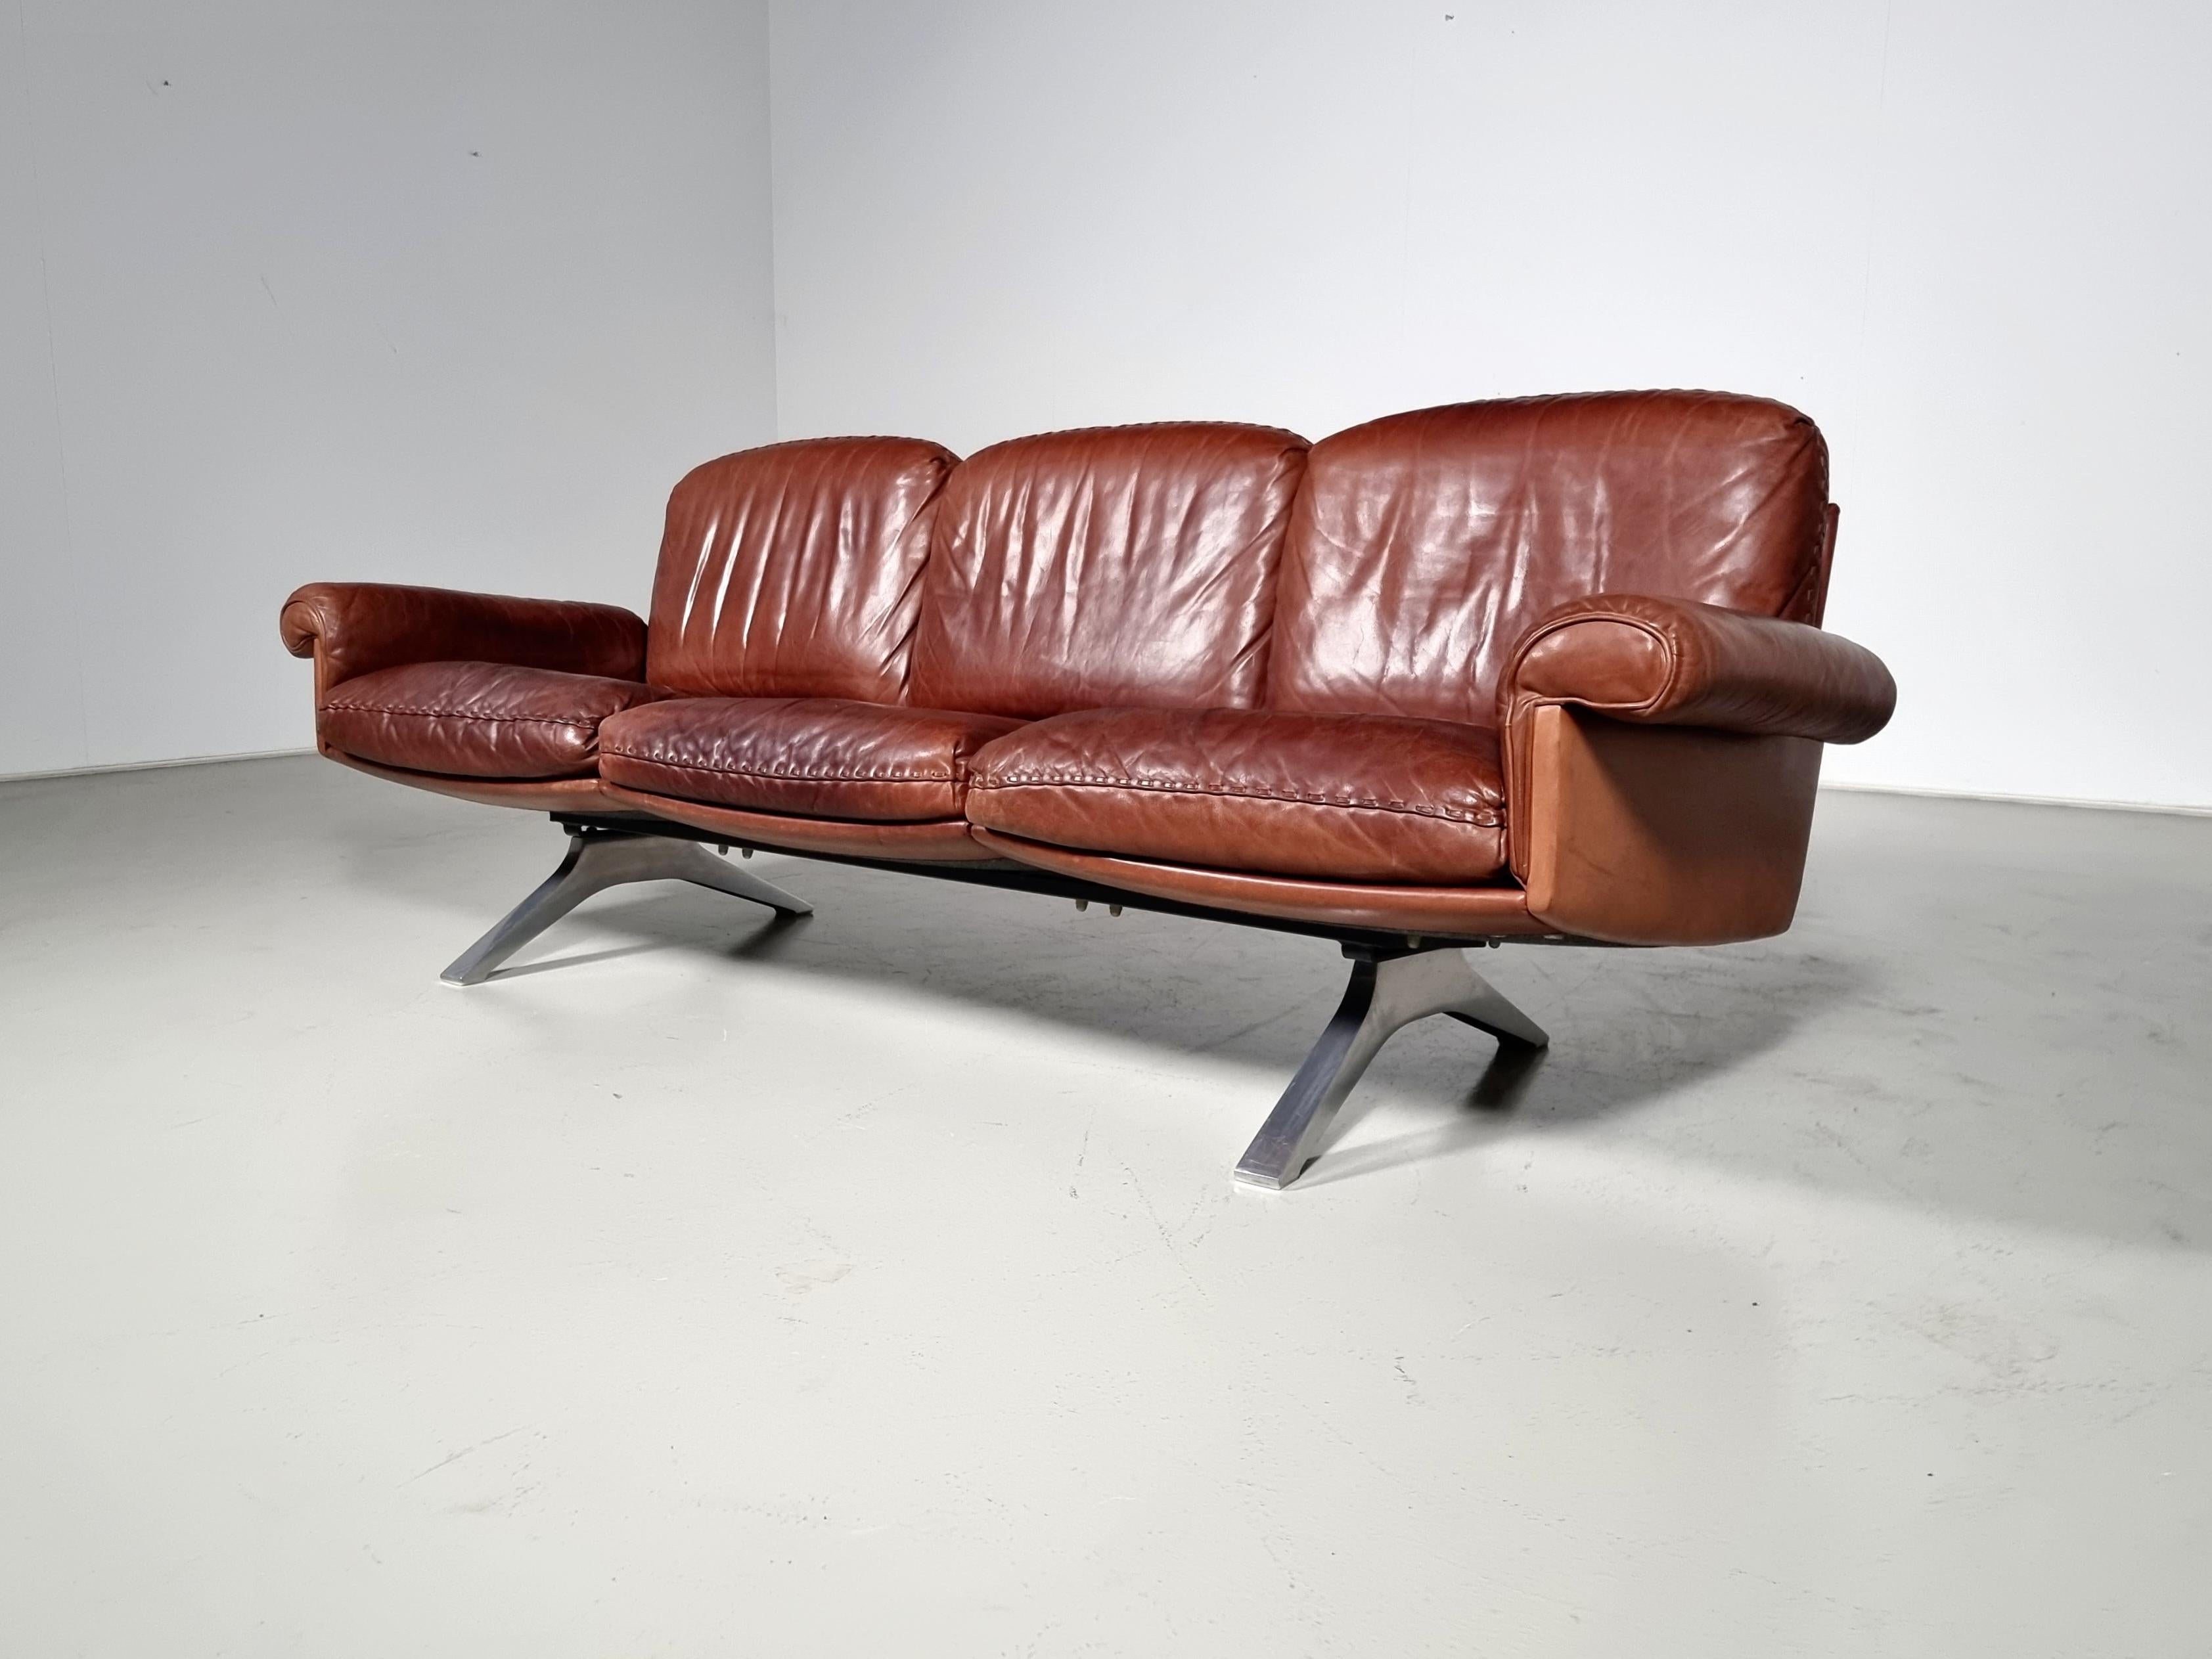 European De Sede DS-31 3-Seater Sofa in Light Brown Leather, 1970s For Sale